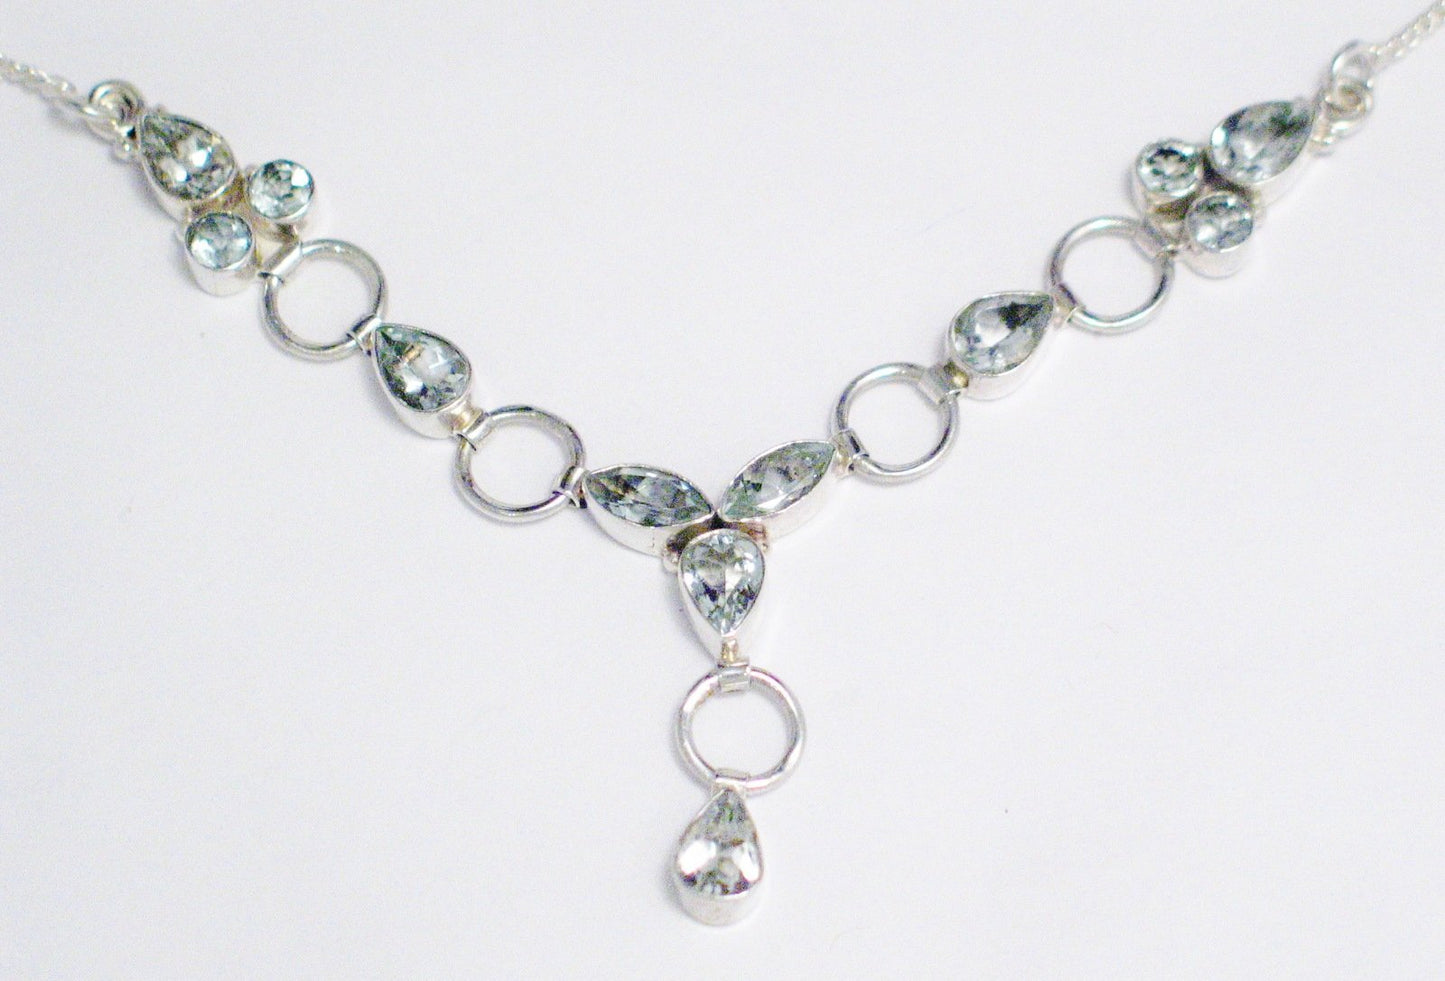 Womenswear Necklace | Sterling Silver Aquamarine Y Chain Necklace 16-18" | Discount Estate Jewelry online